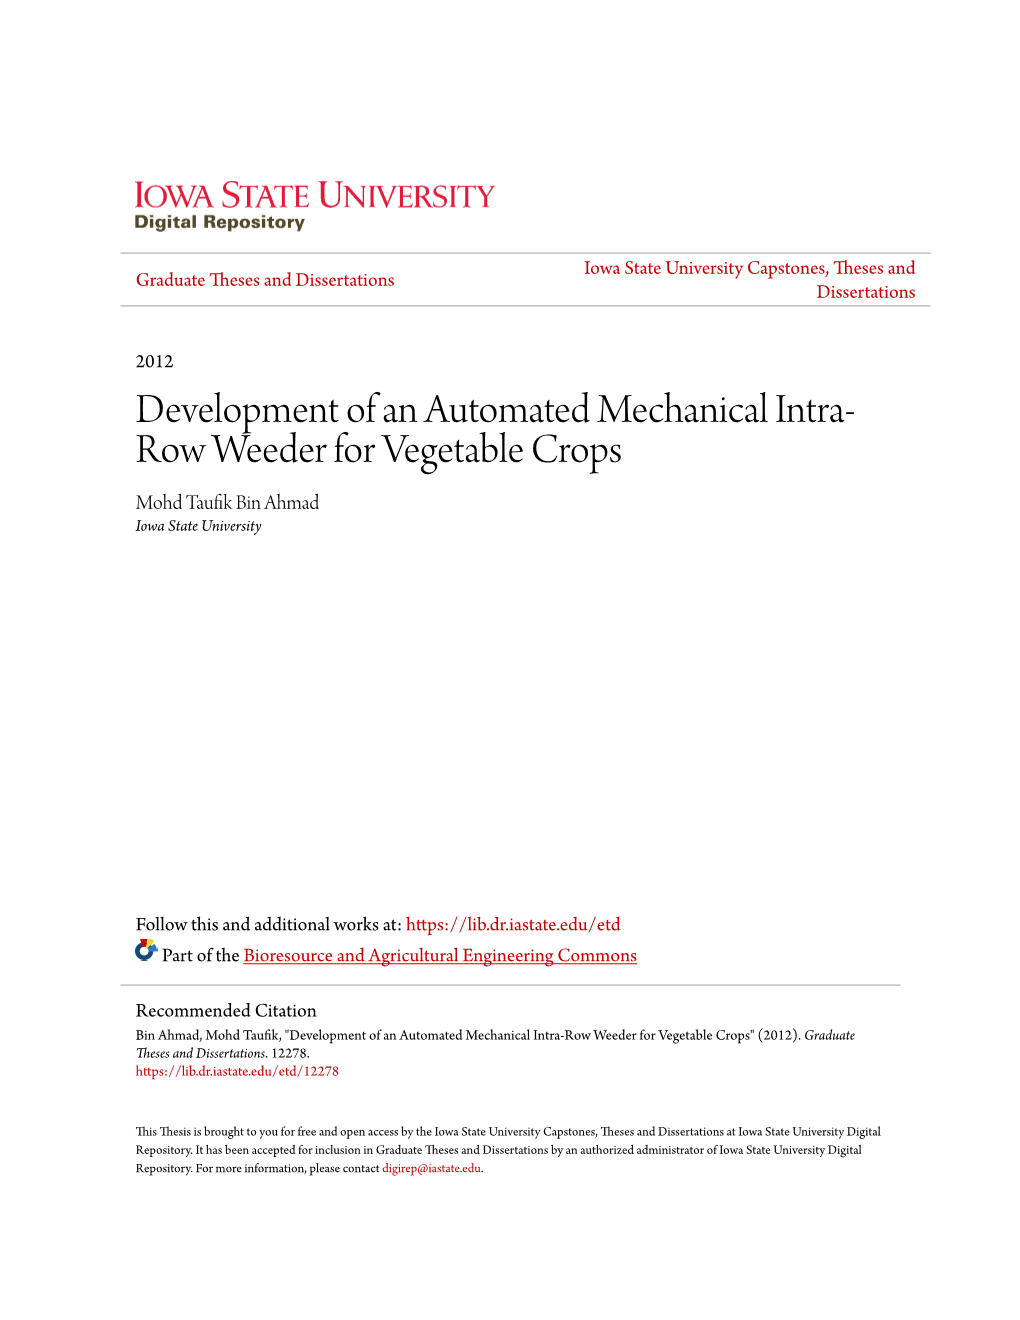 Development of an Automated Mechanical Intra-Row Weeder for Vegetable Crops" (2012)